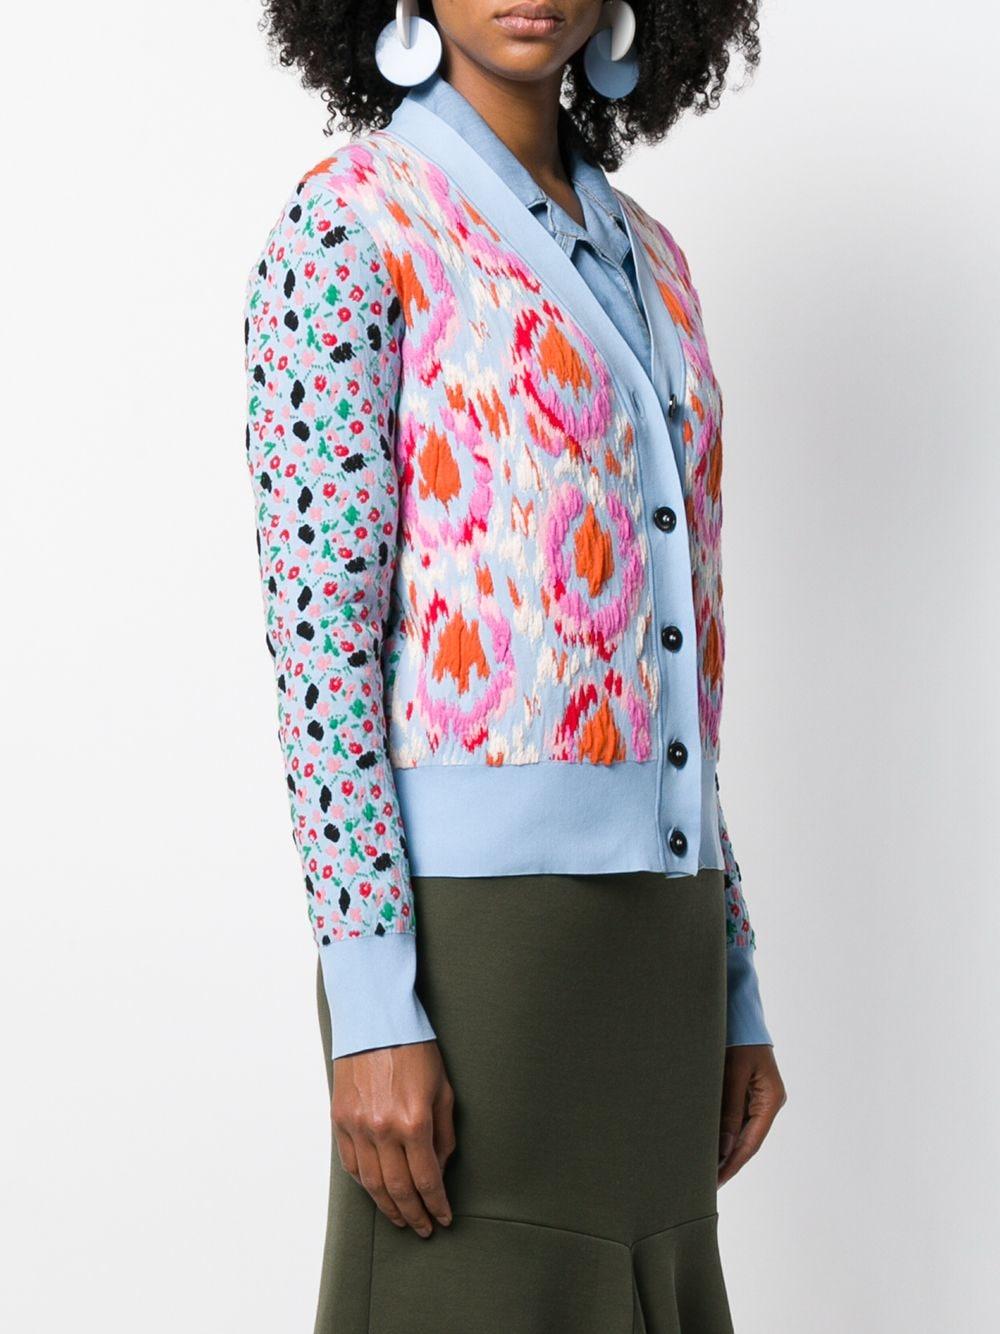 Marni Cotton Abstract Floral Pattern Cardigan in Blue - Save 14% - Lyst